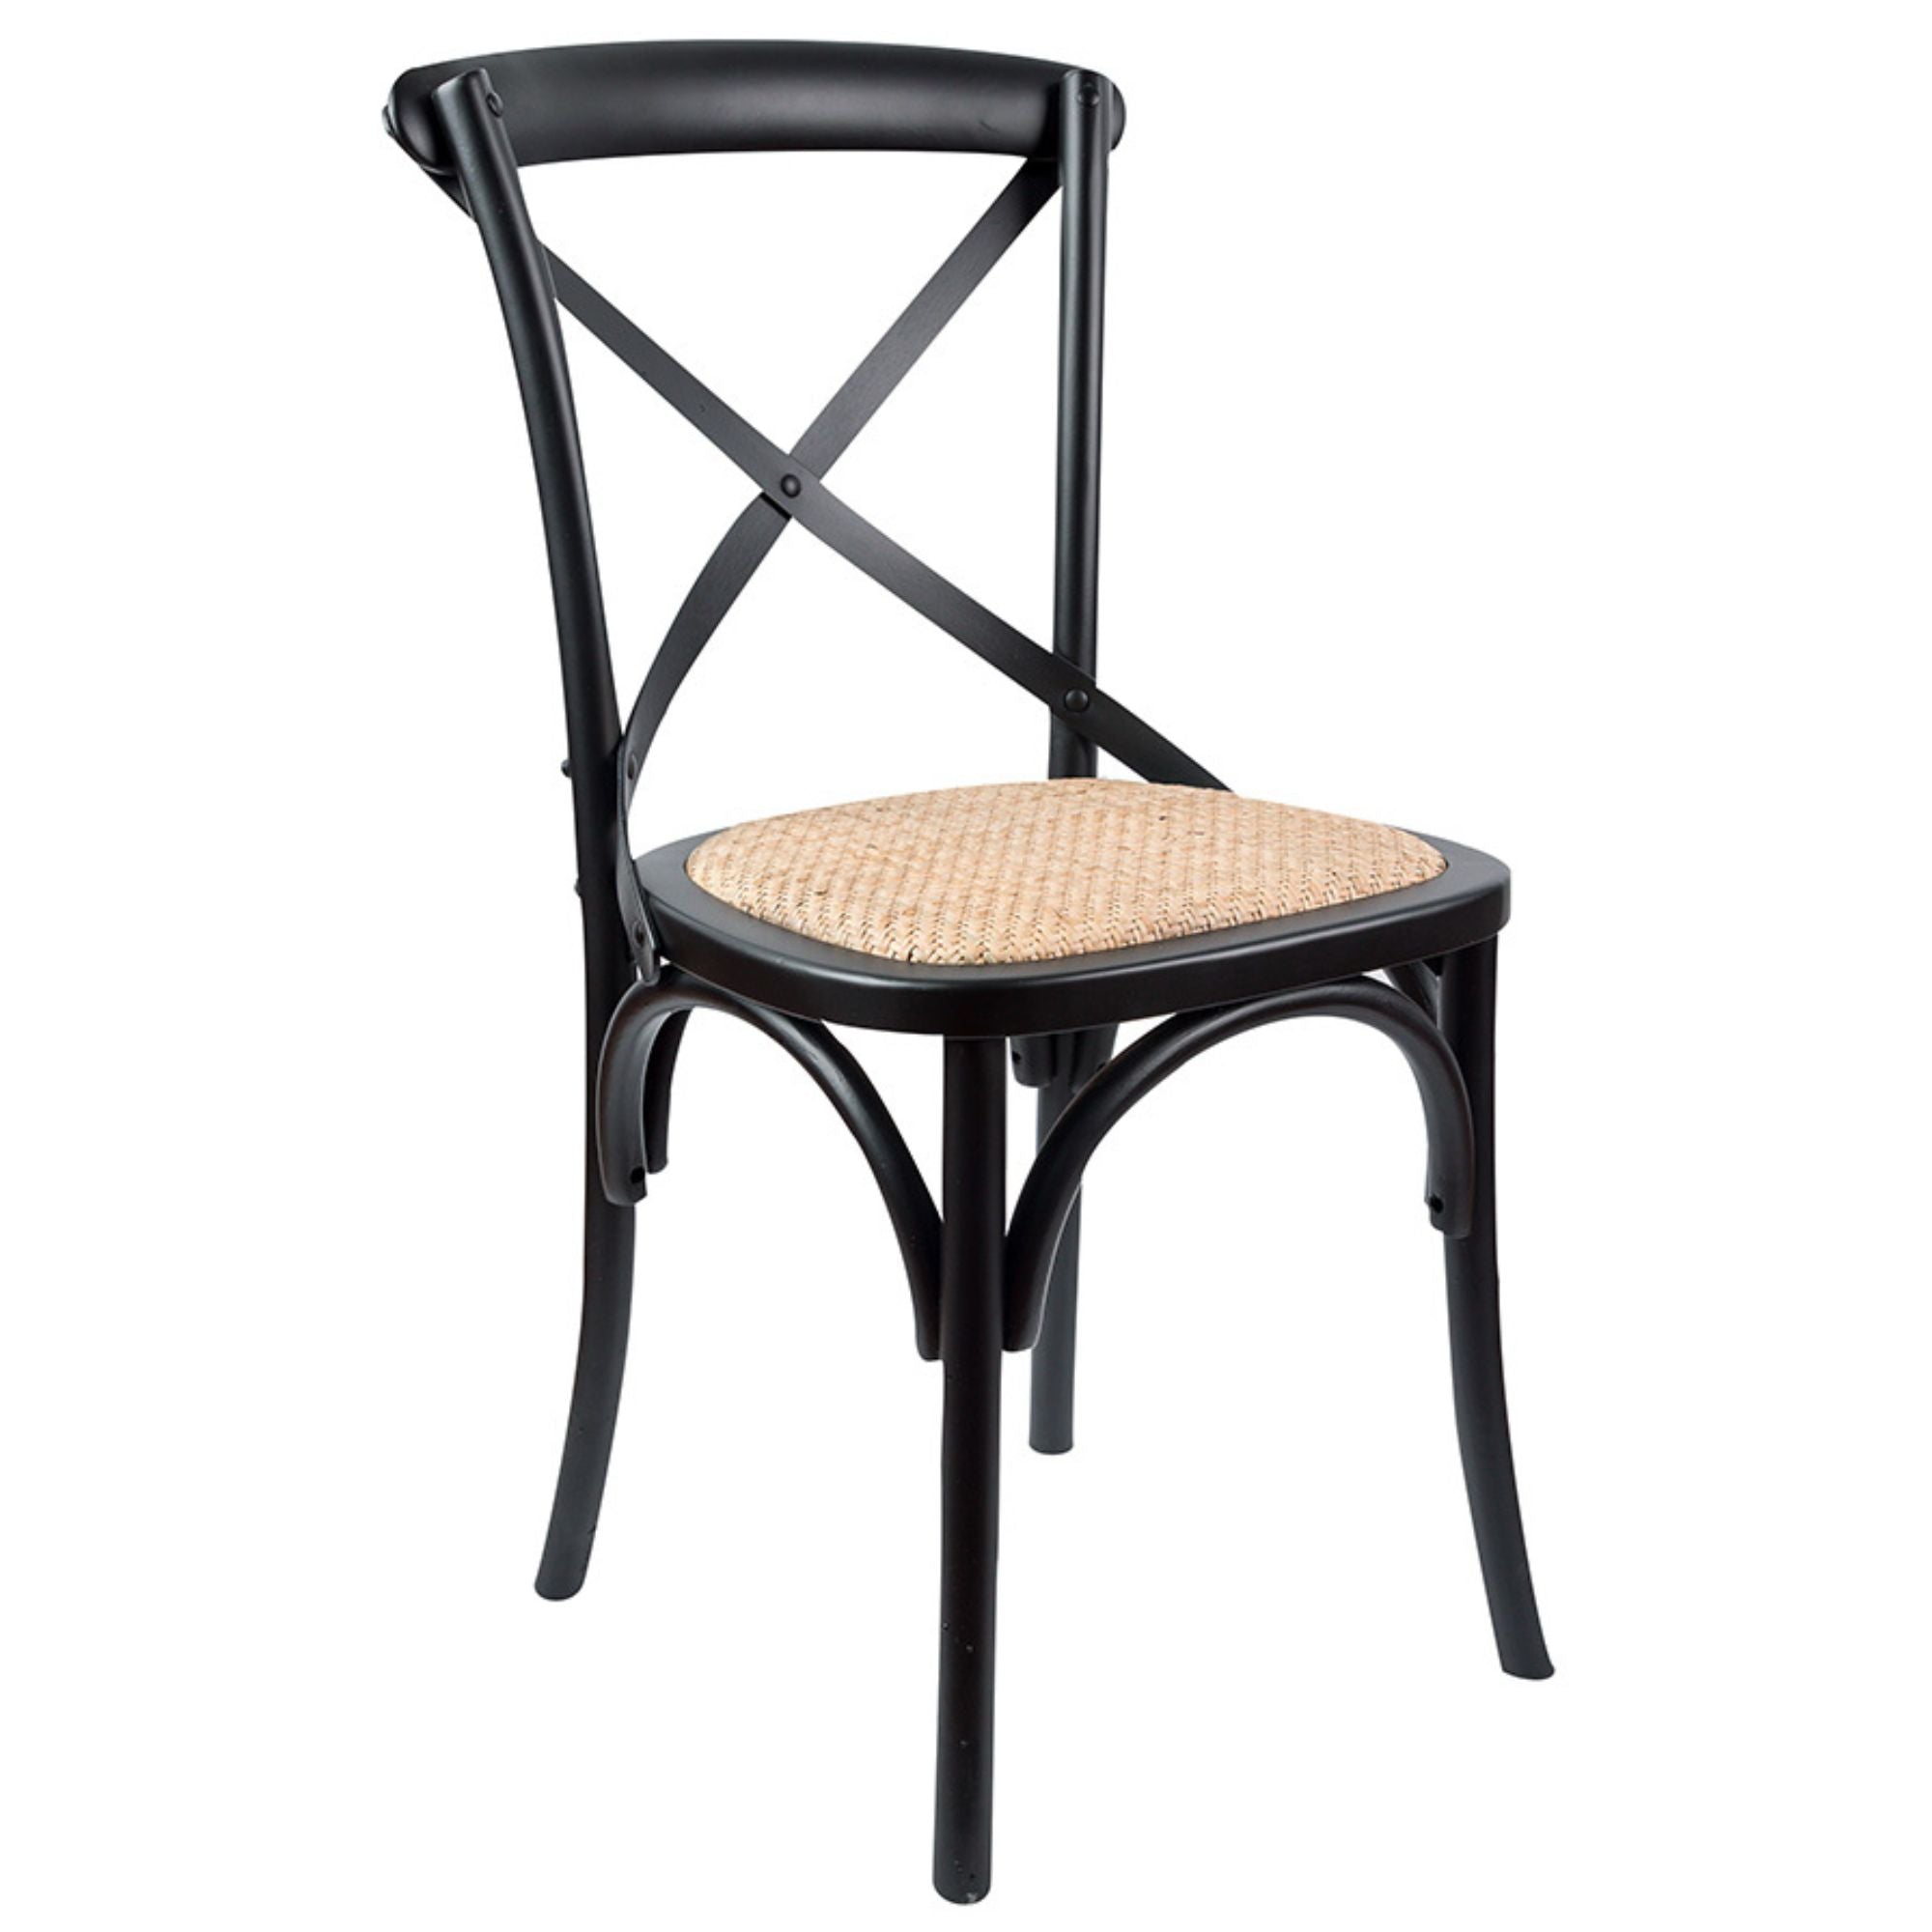 Crossback Dining Chair Set Of 4 Solid Birch Timber Wood Ratan Seat - Black